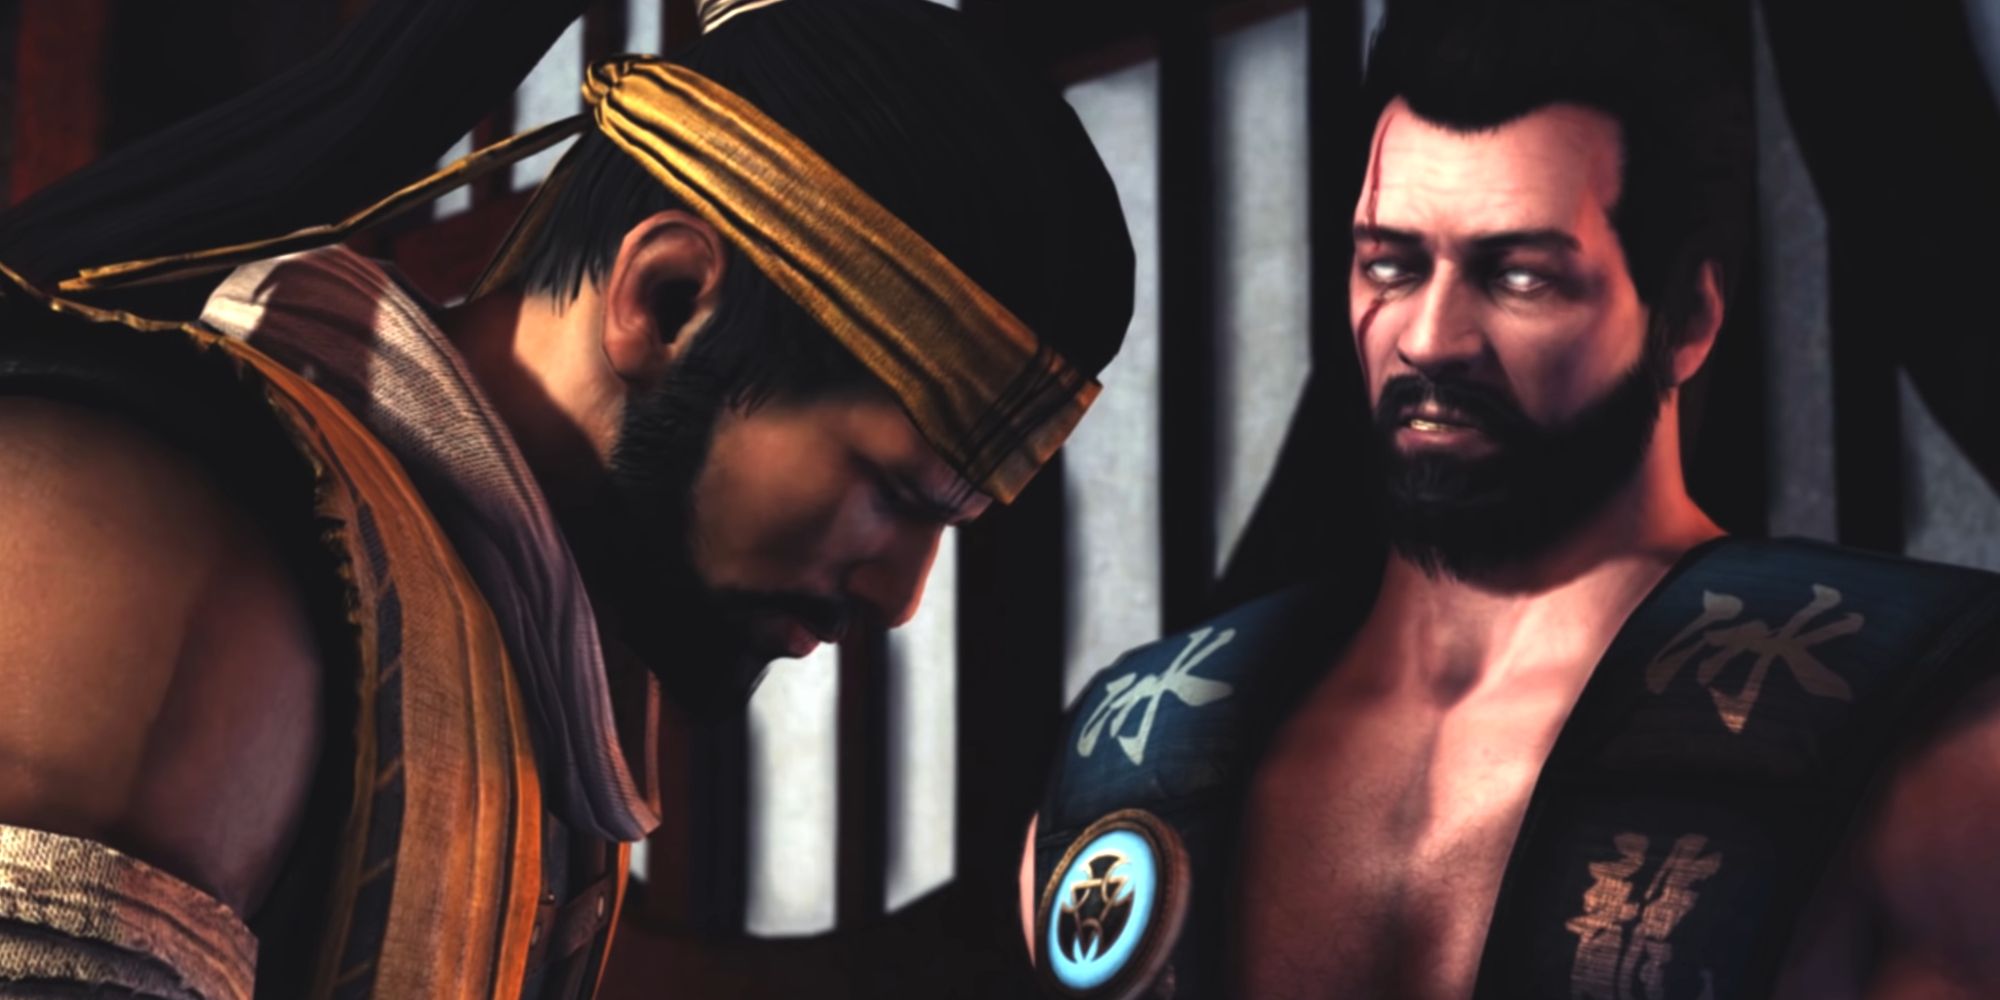 Sub Zero revealing the truth about Scorpions past in Mortal Kombat X